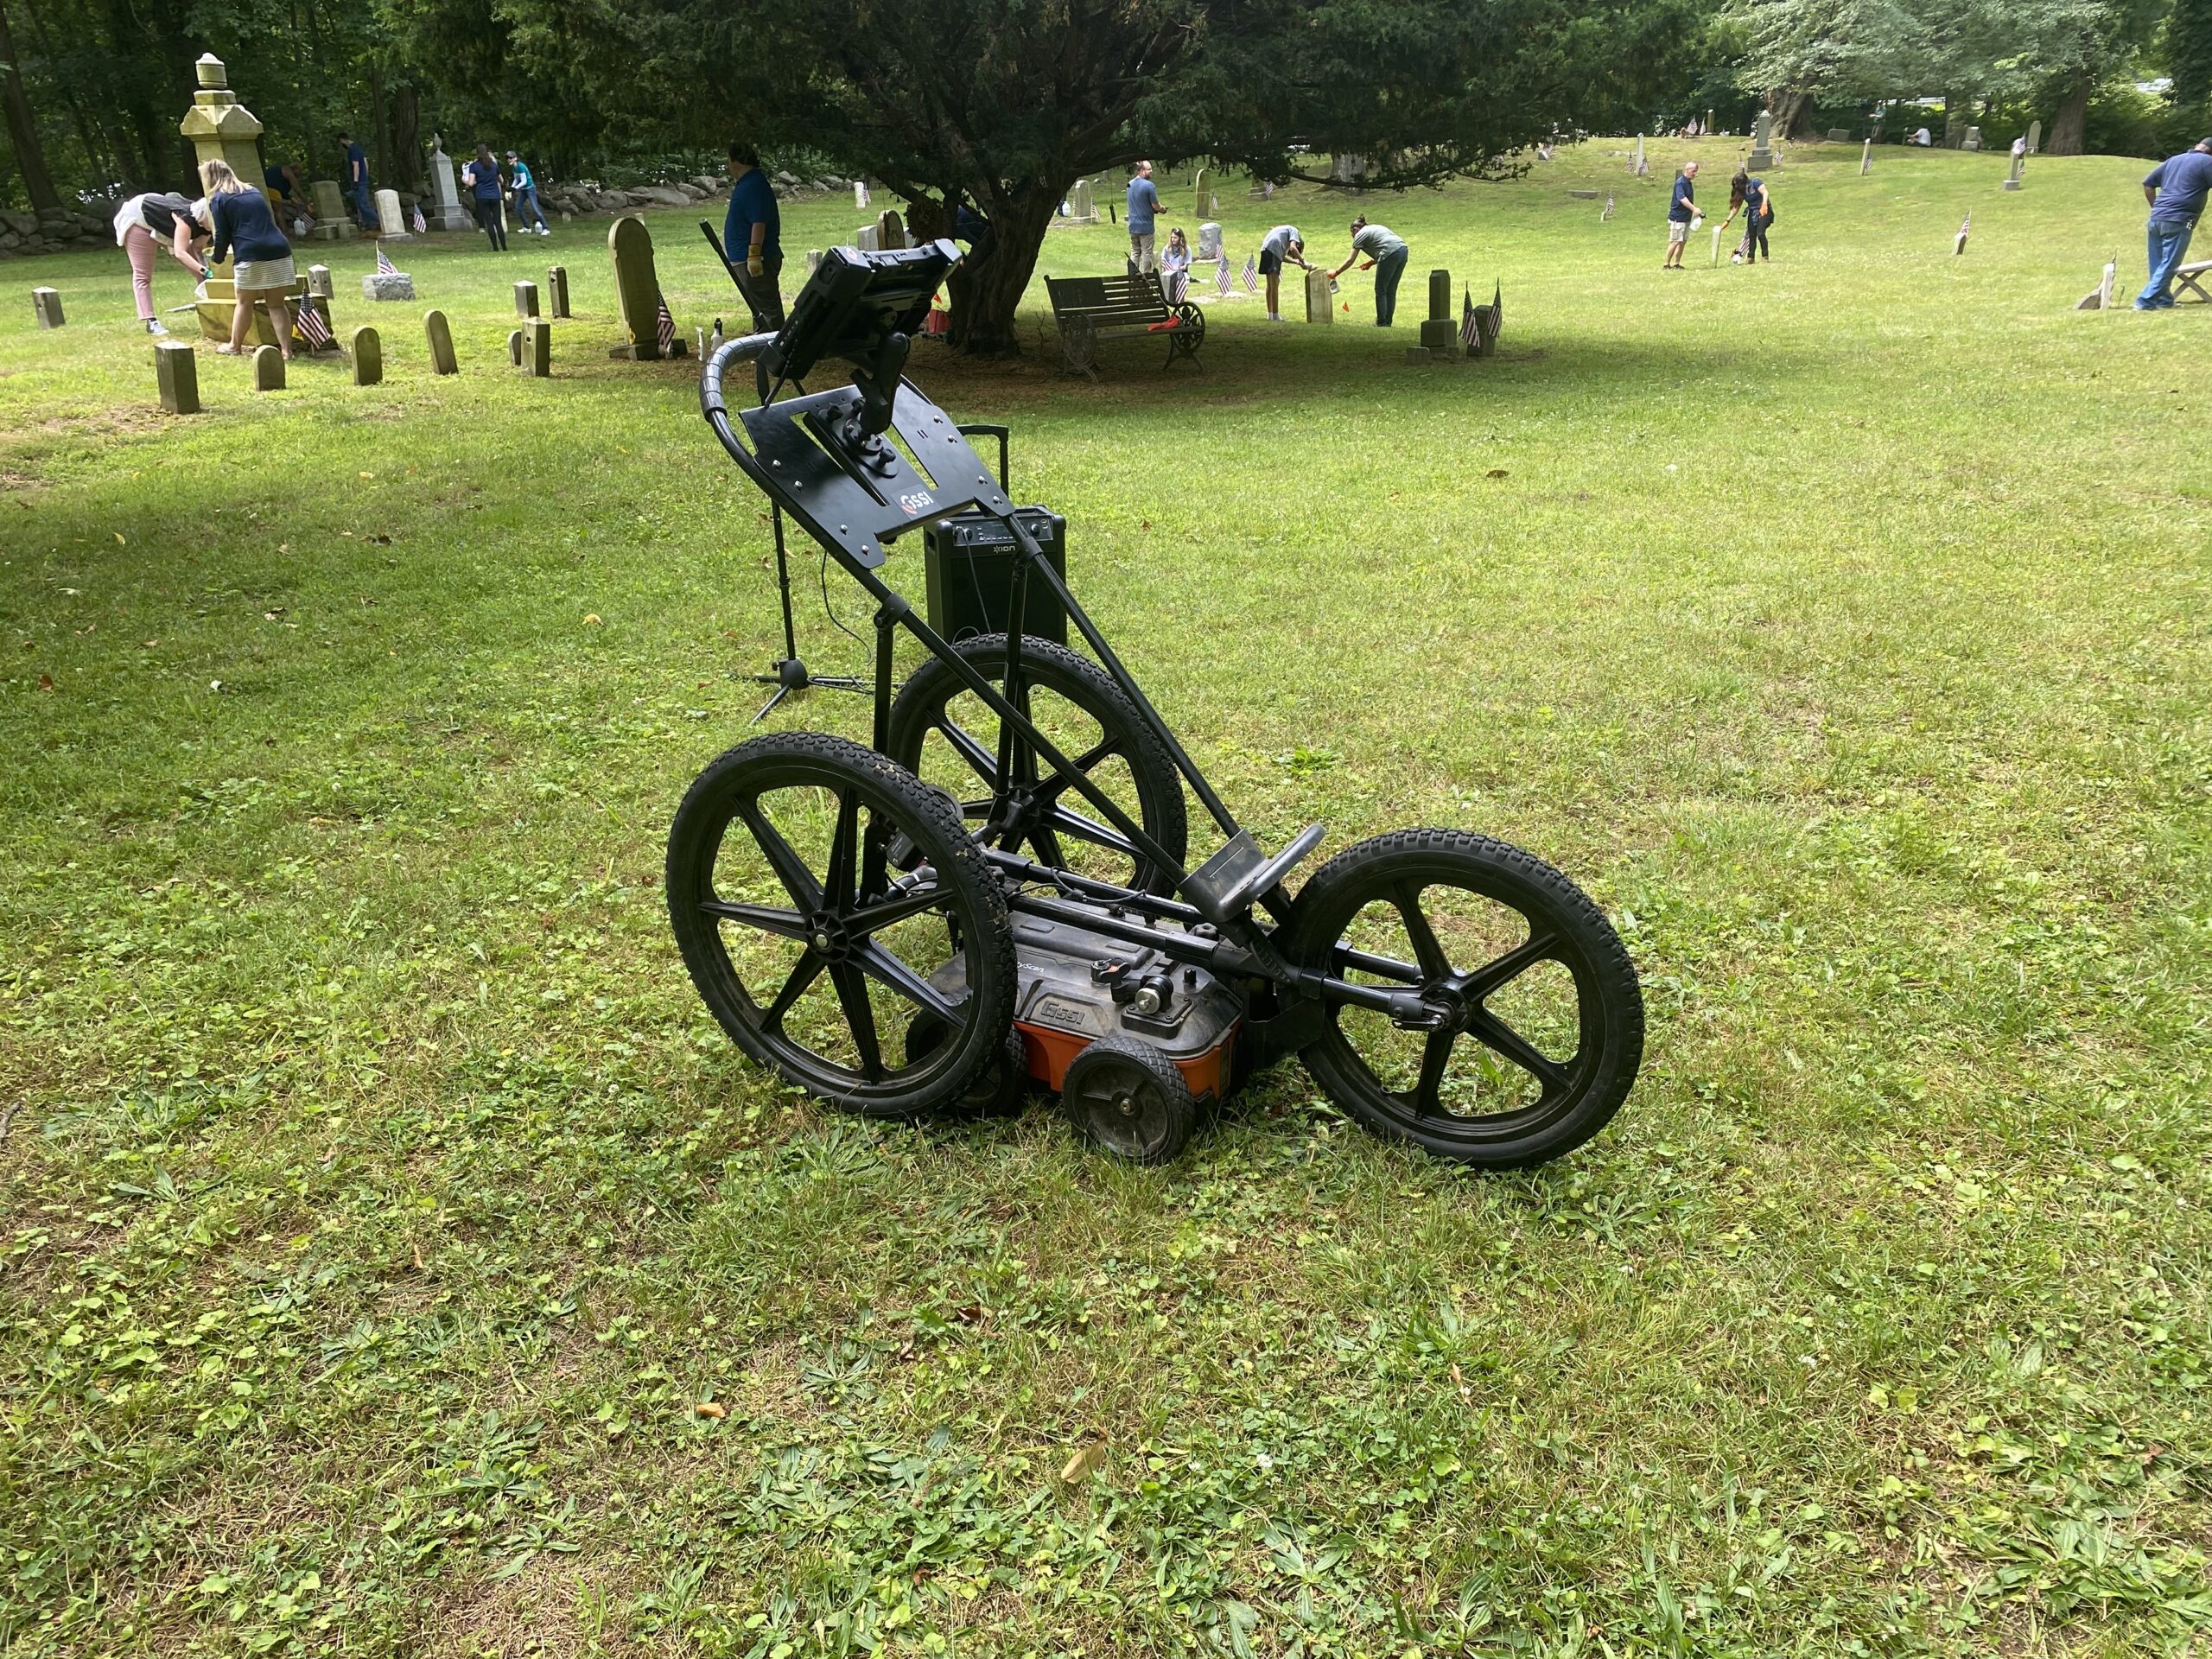 (PHOTO: The new tool used at the African American Cemetery to identify unmarked tombstones.)